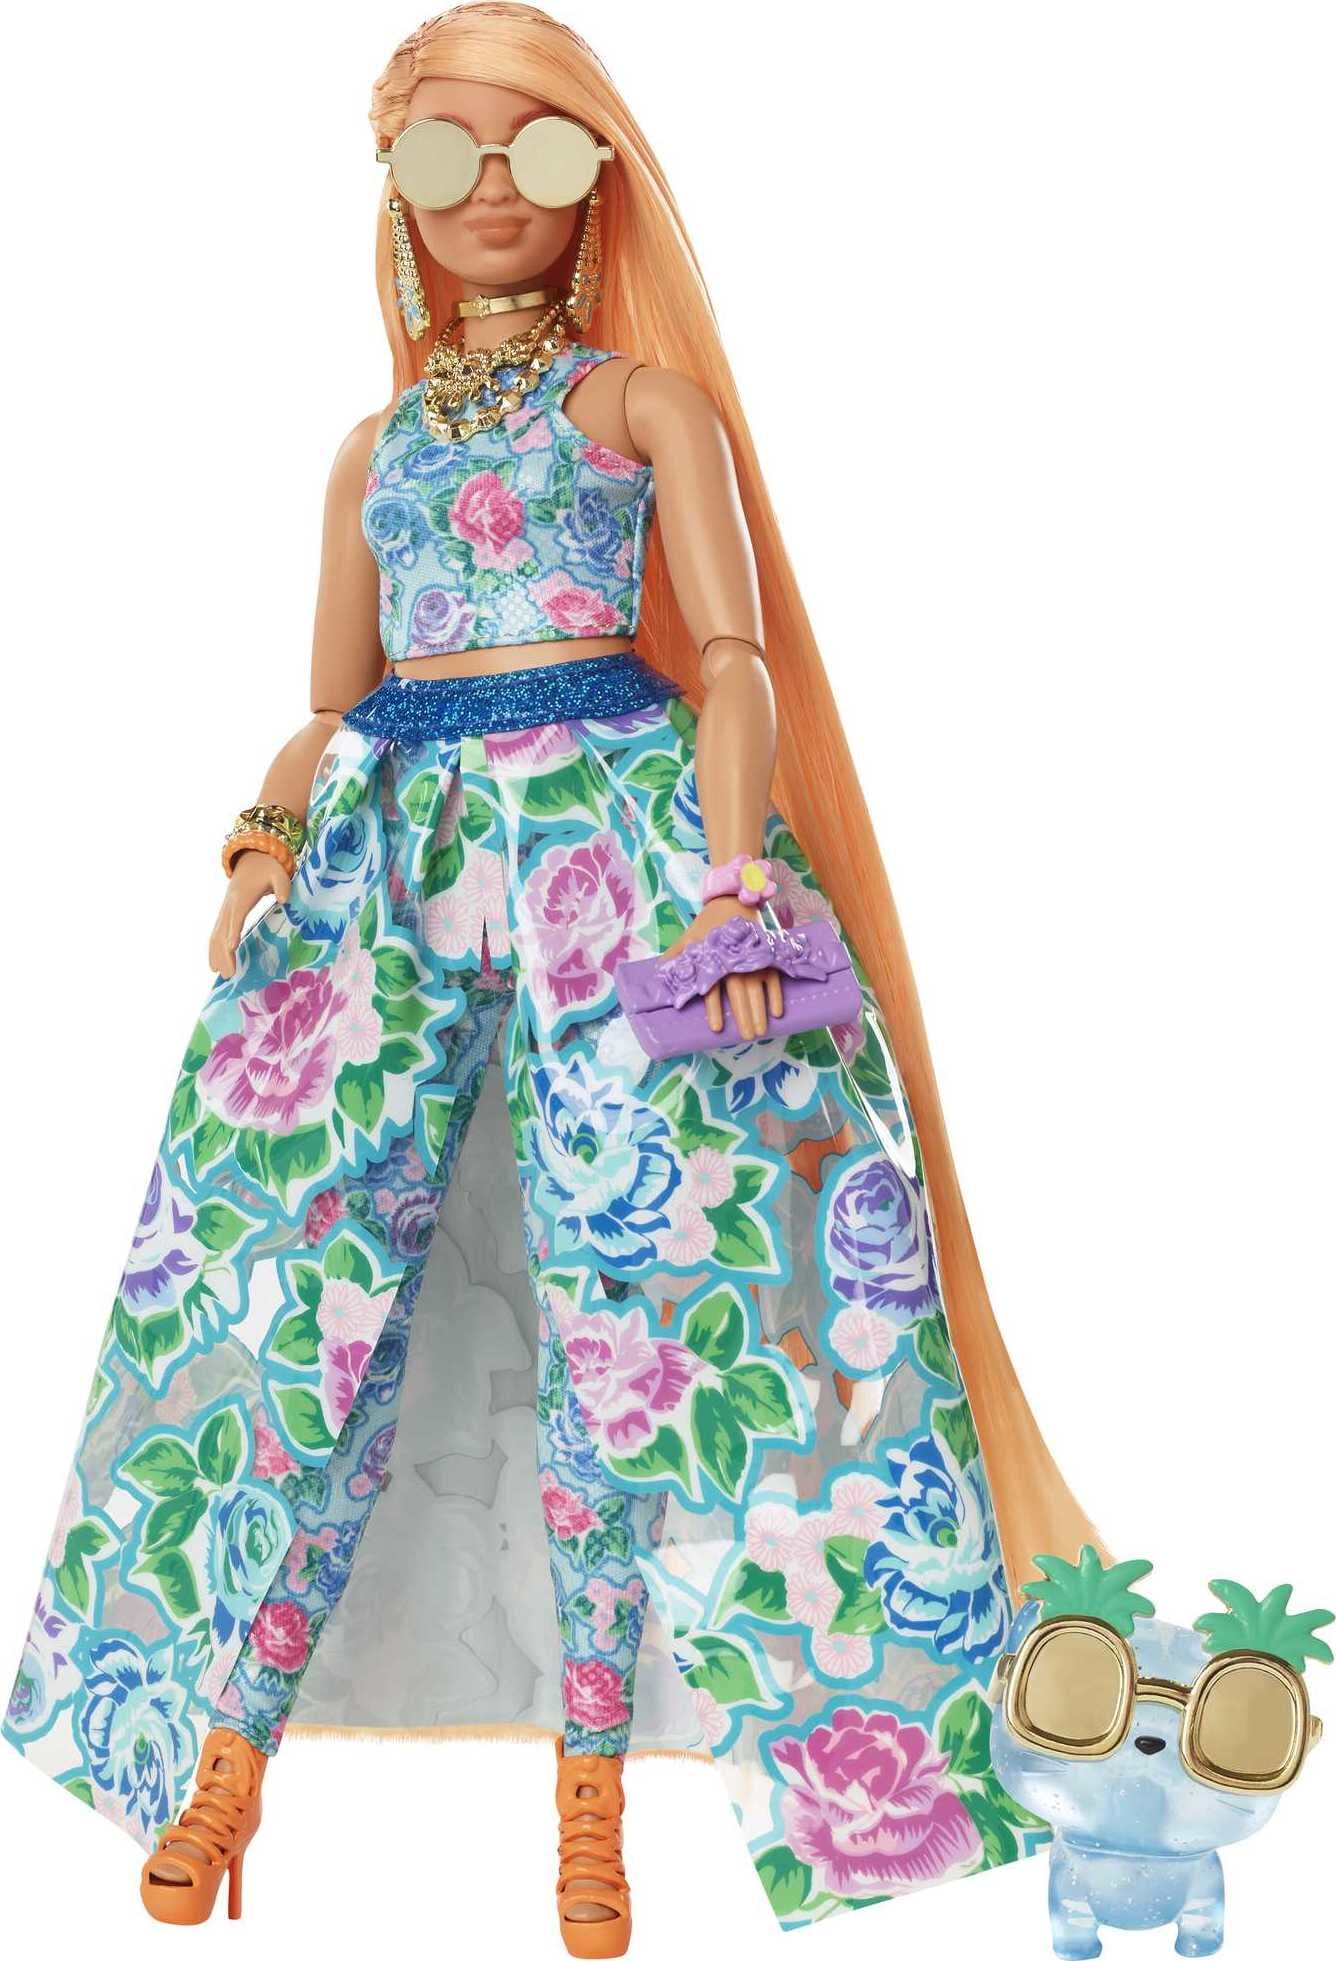 Barbie Extra Fancy Doll in Floral 2-Piece Gown, with Pet, 3 Year Olds & Up